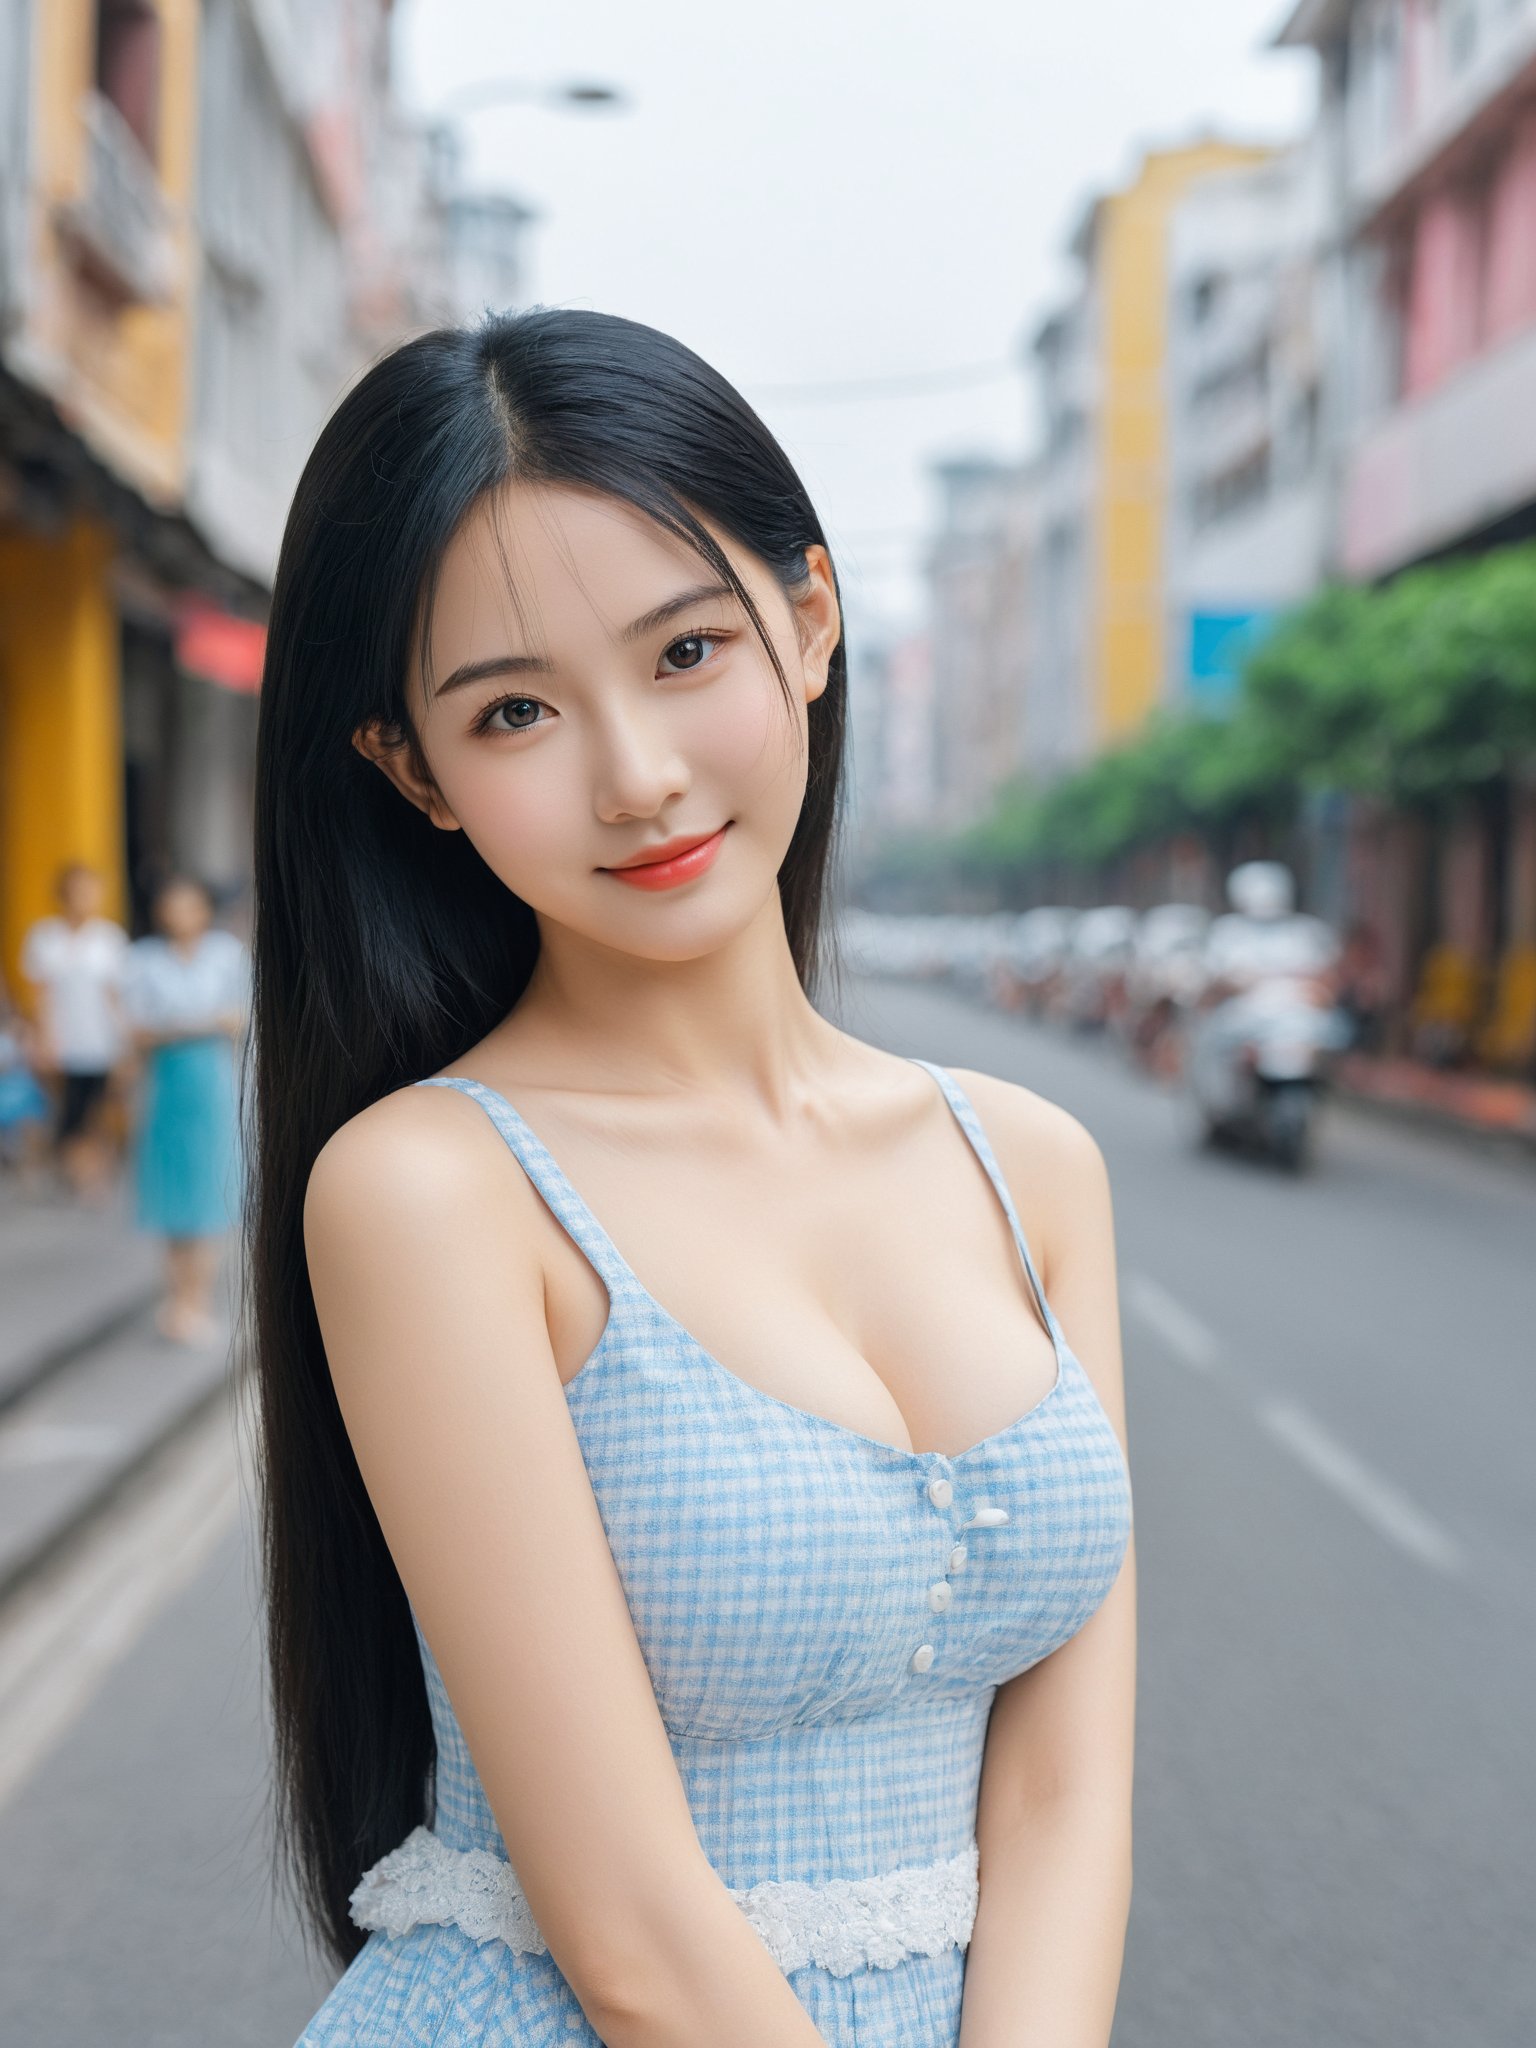 masterpiece, best quality, realistic, photo, real, incredibly_absurdres, Ultra HD,Affectionately looking at you,8K,UHD,in the city street,simple background, upper body, arms behind head,arms behind back , bust photo,The 20-year-old vietnamese girl, full body ,She has black hair. The lines of her face are soft and smooth. Her skin is as fair as snow, soft and delicate, and her eyes are bright and bright, deep and mysterious, making people feel endless charm and appeal. The eyebrows are slender and graceful, the nose is straight and noble, the lips are rosy and seductive, and the slightly raised angle reveals confidence and elegance. Her facial features are delicate and three-dimensional, with well-defined contours, like a fine painting or a finely carved work of art. The overall feeling is gentle, elegant, noble and full of charm.masterpiece, best quality, realistic, photo, real, absurdres, incredibly_absurdres, huge_filesize, bust, girl, kawaii, adorable girl, bishoujo, ojousama, idol, student, long hair, black hair, beautiful detailed eyes, looking at viewer, seductive smile, black eyes, large breasts, arms behind back ,